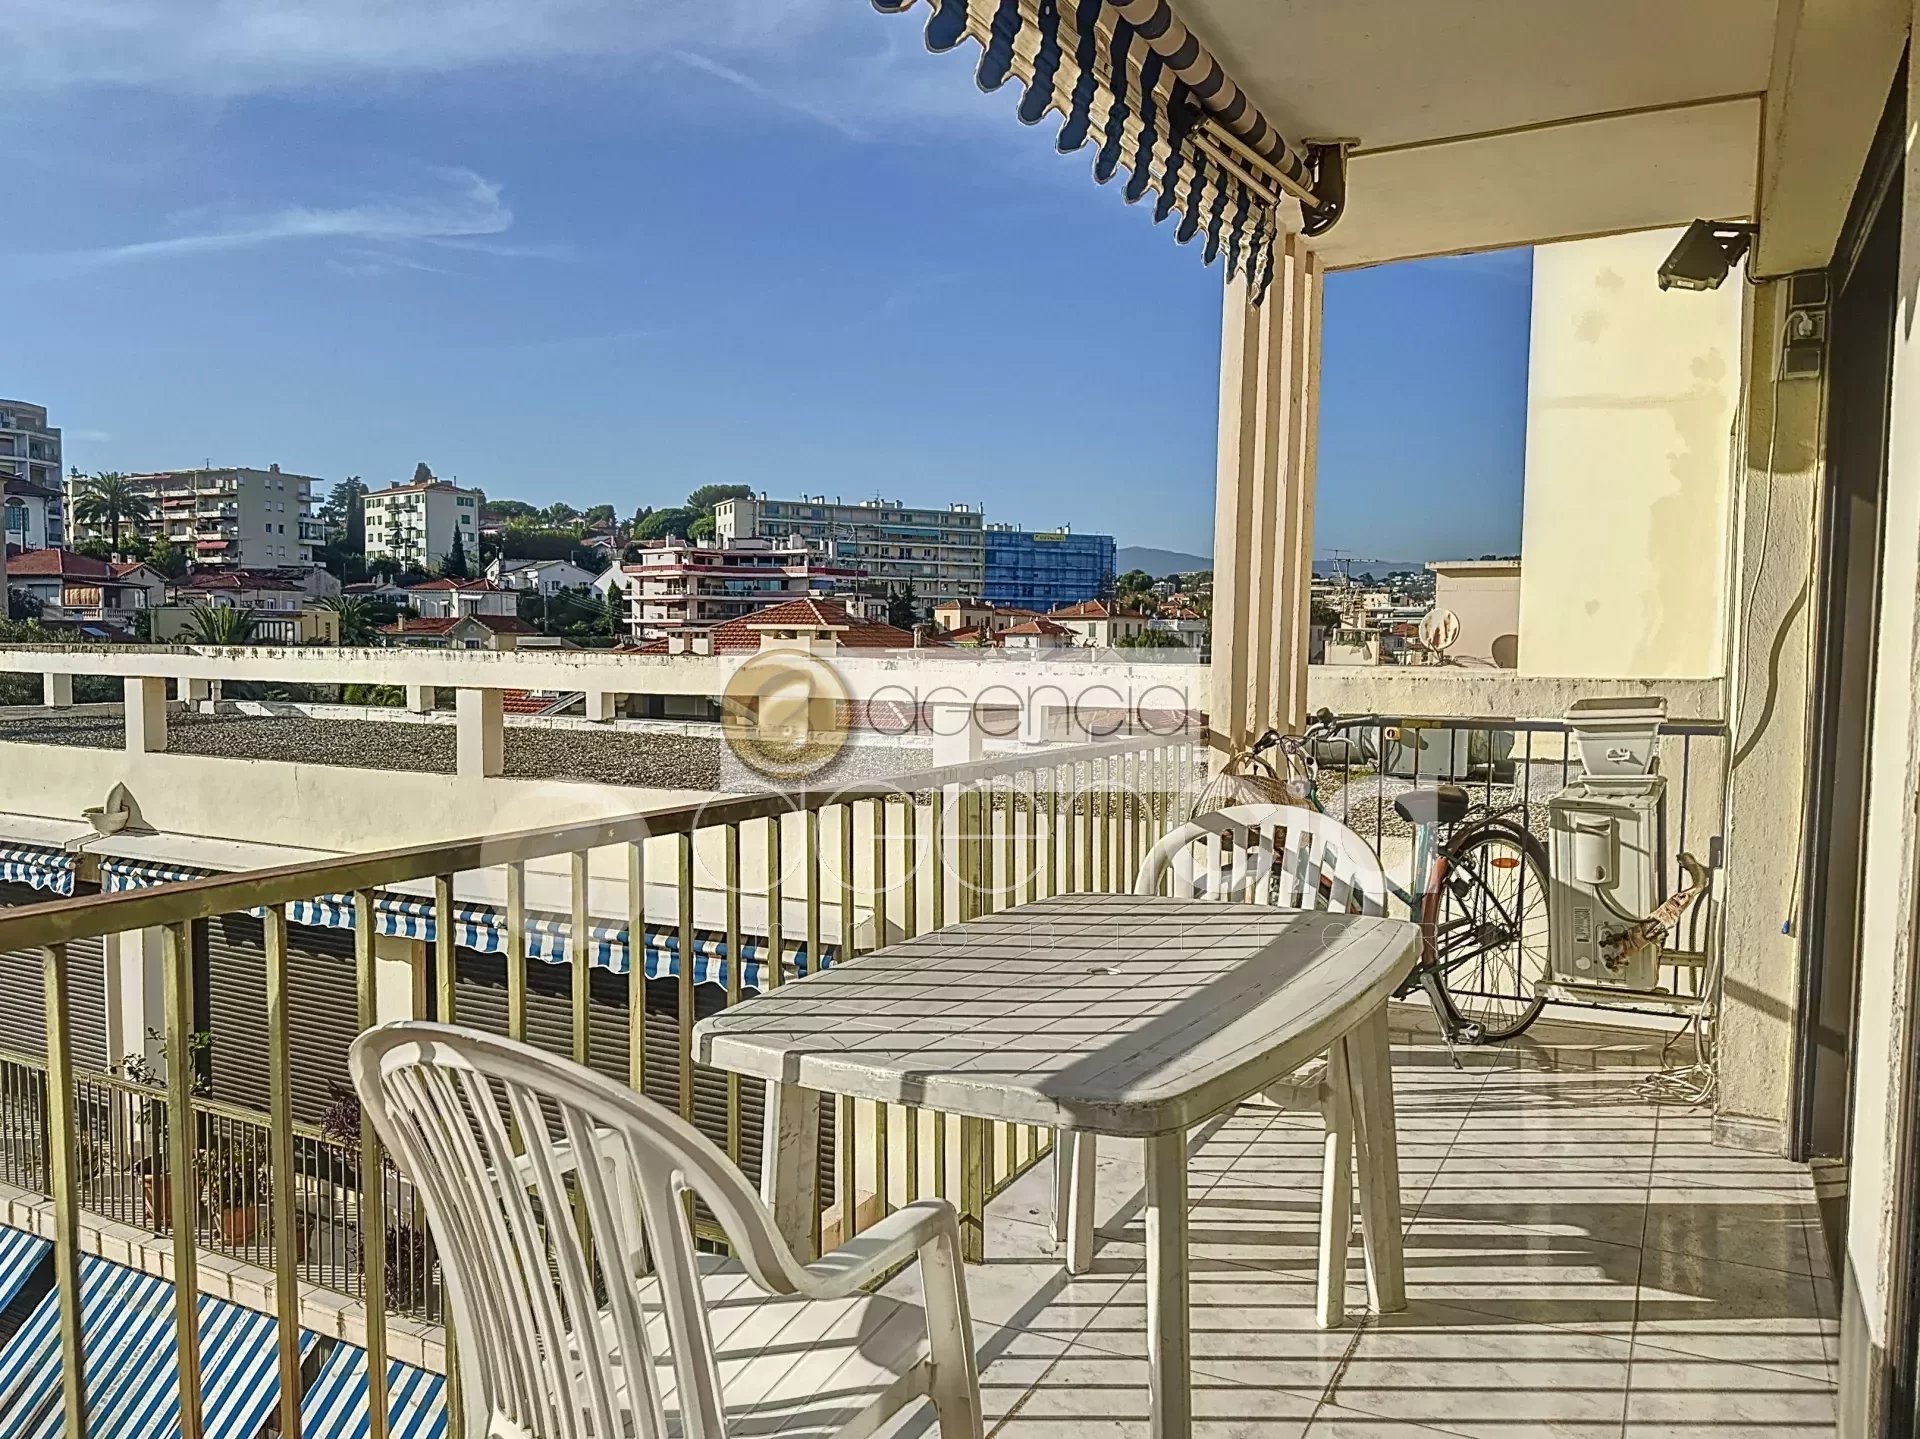 SPACIOUS 89M2 3-ROOM APARTMENT - 2 LARGE TERRACES - CLOSE TO CANNES CENTER